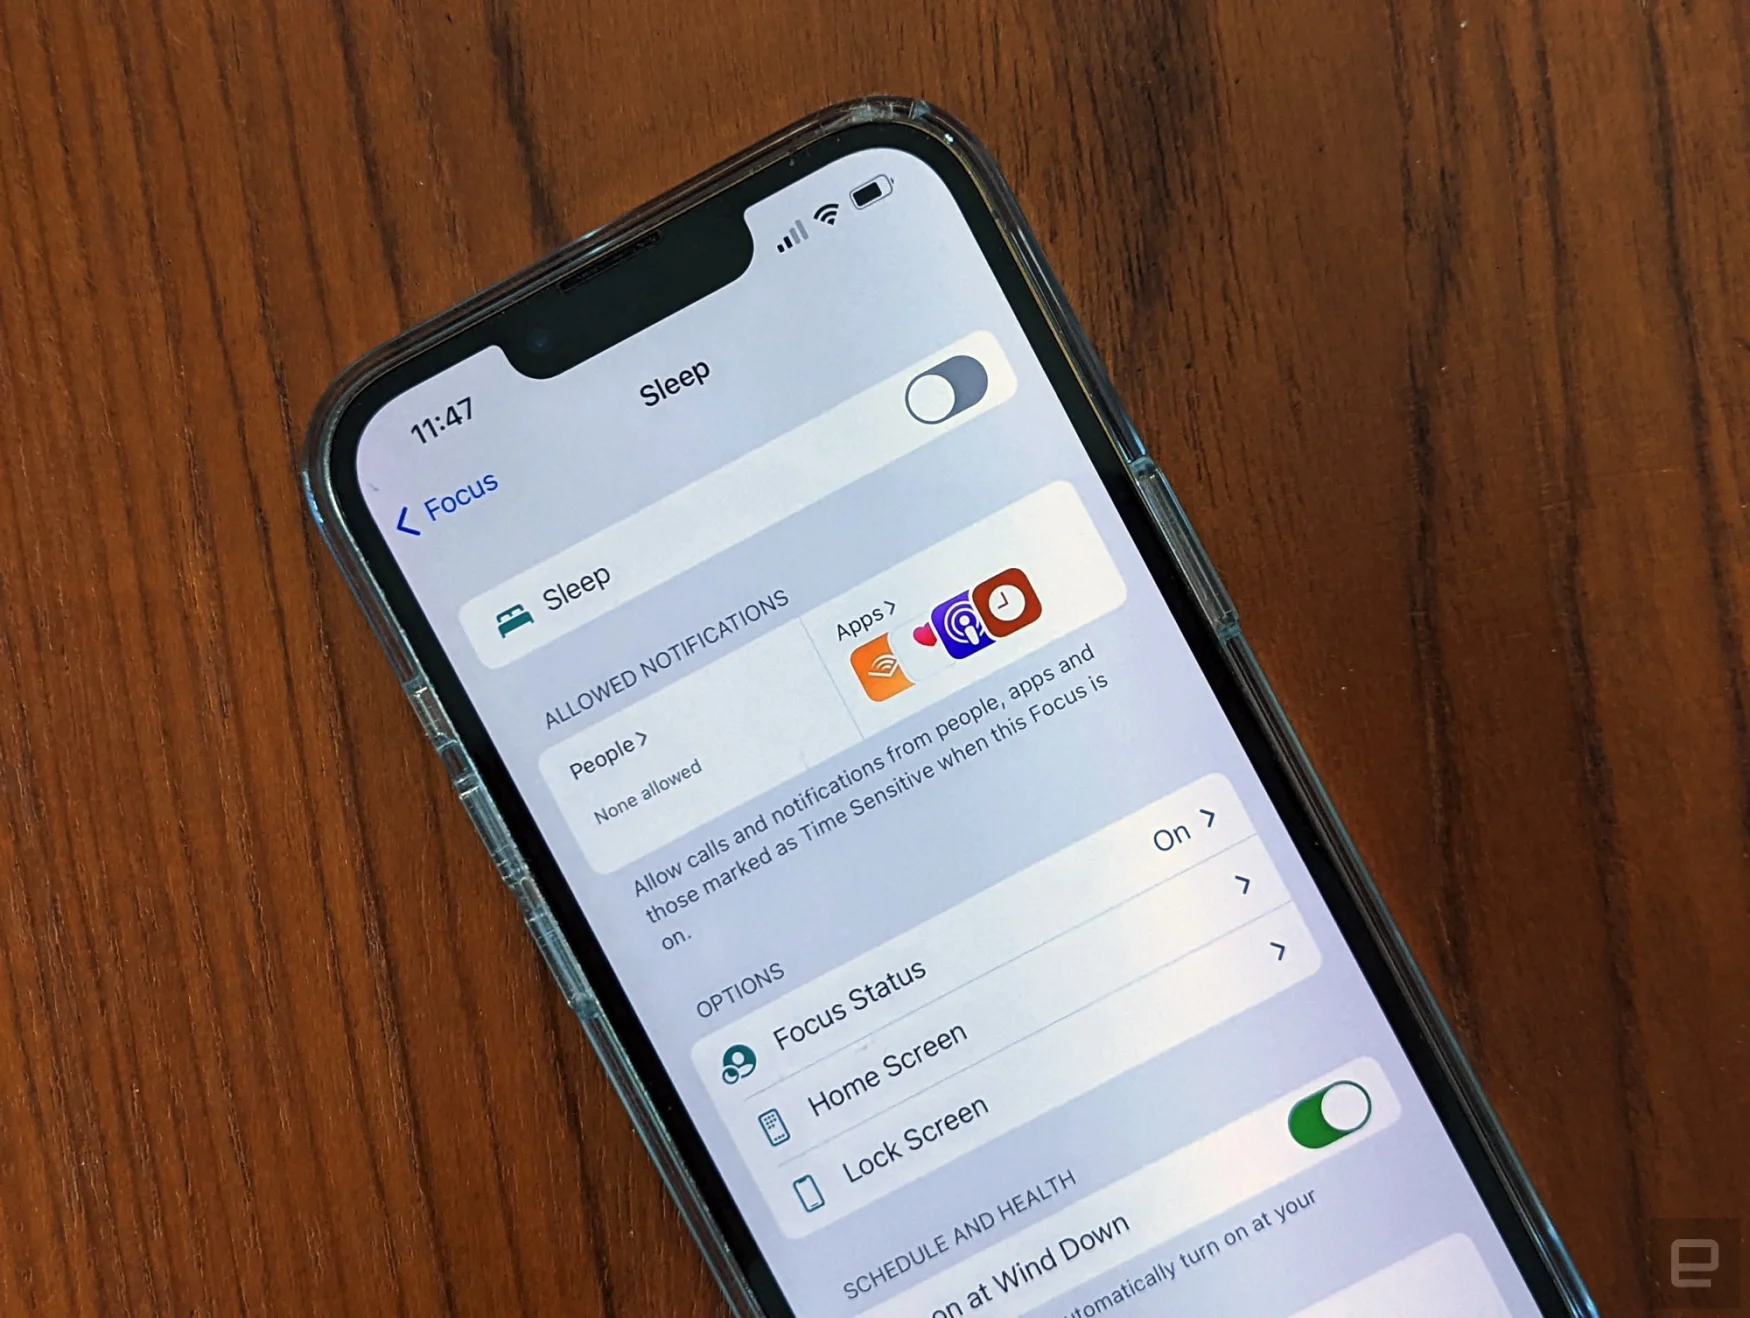 iOS 15 review